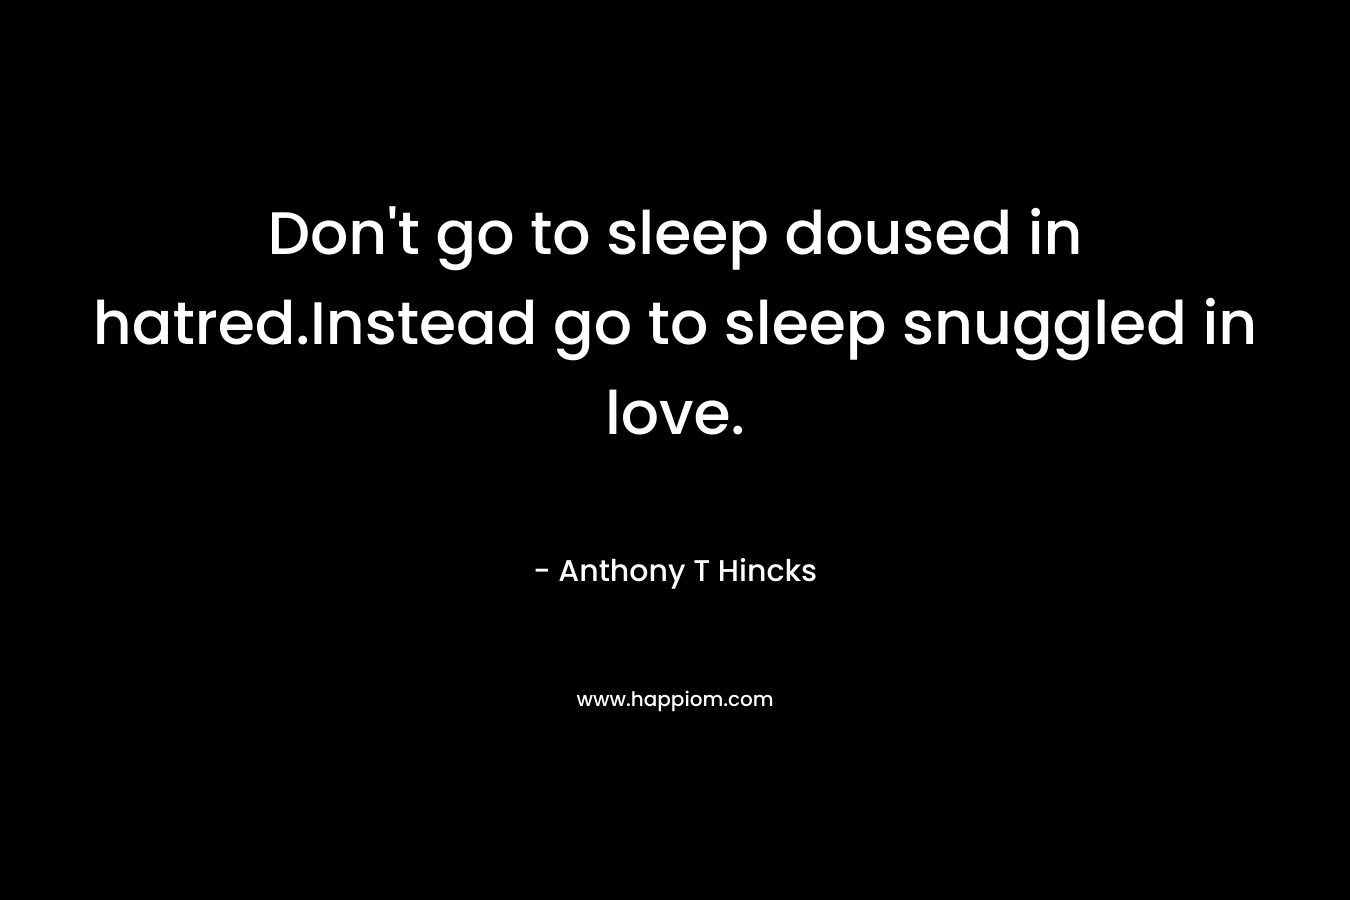 Don't go to sleep doused in hatred.Instead go to sleep snuggled in love.